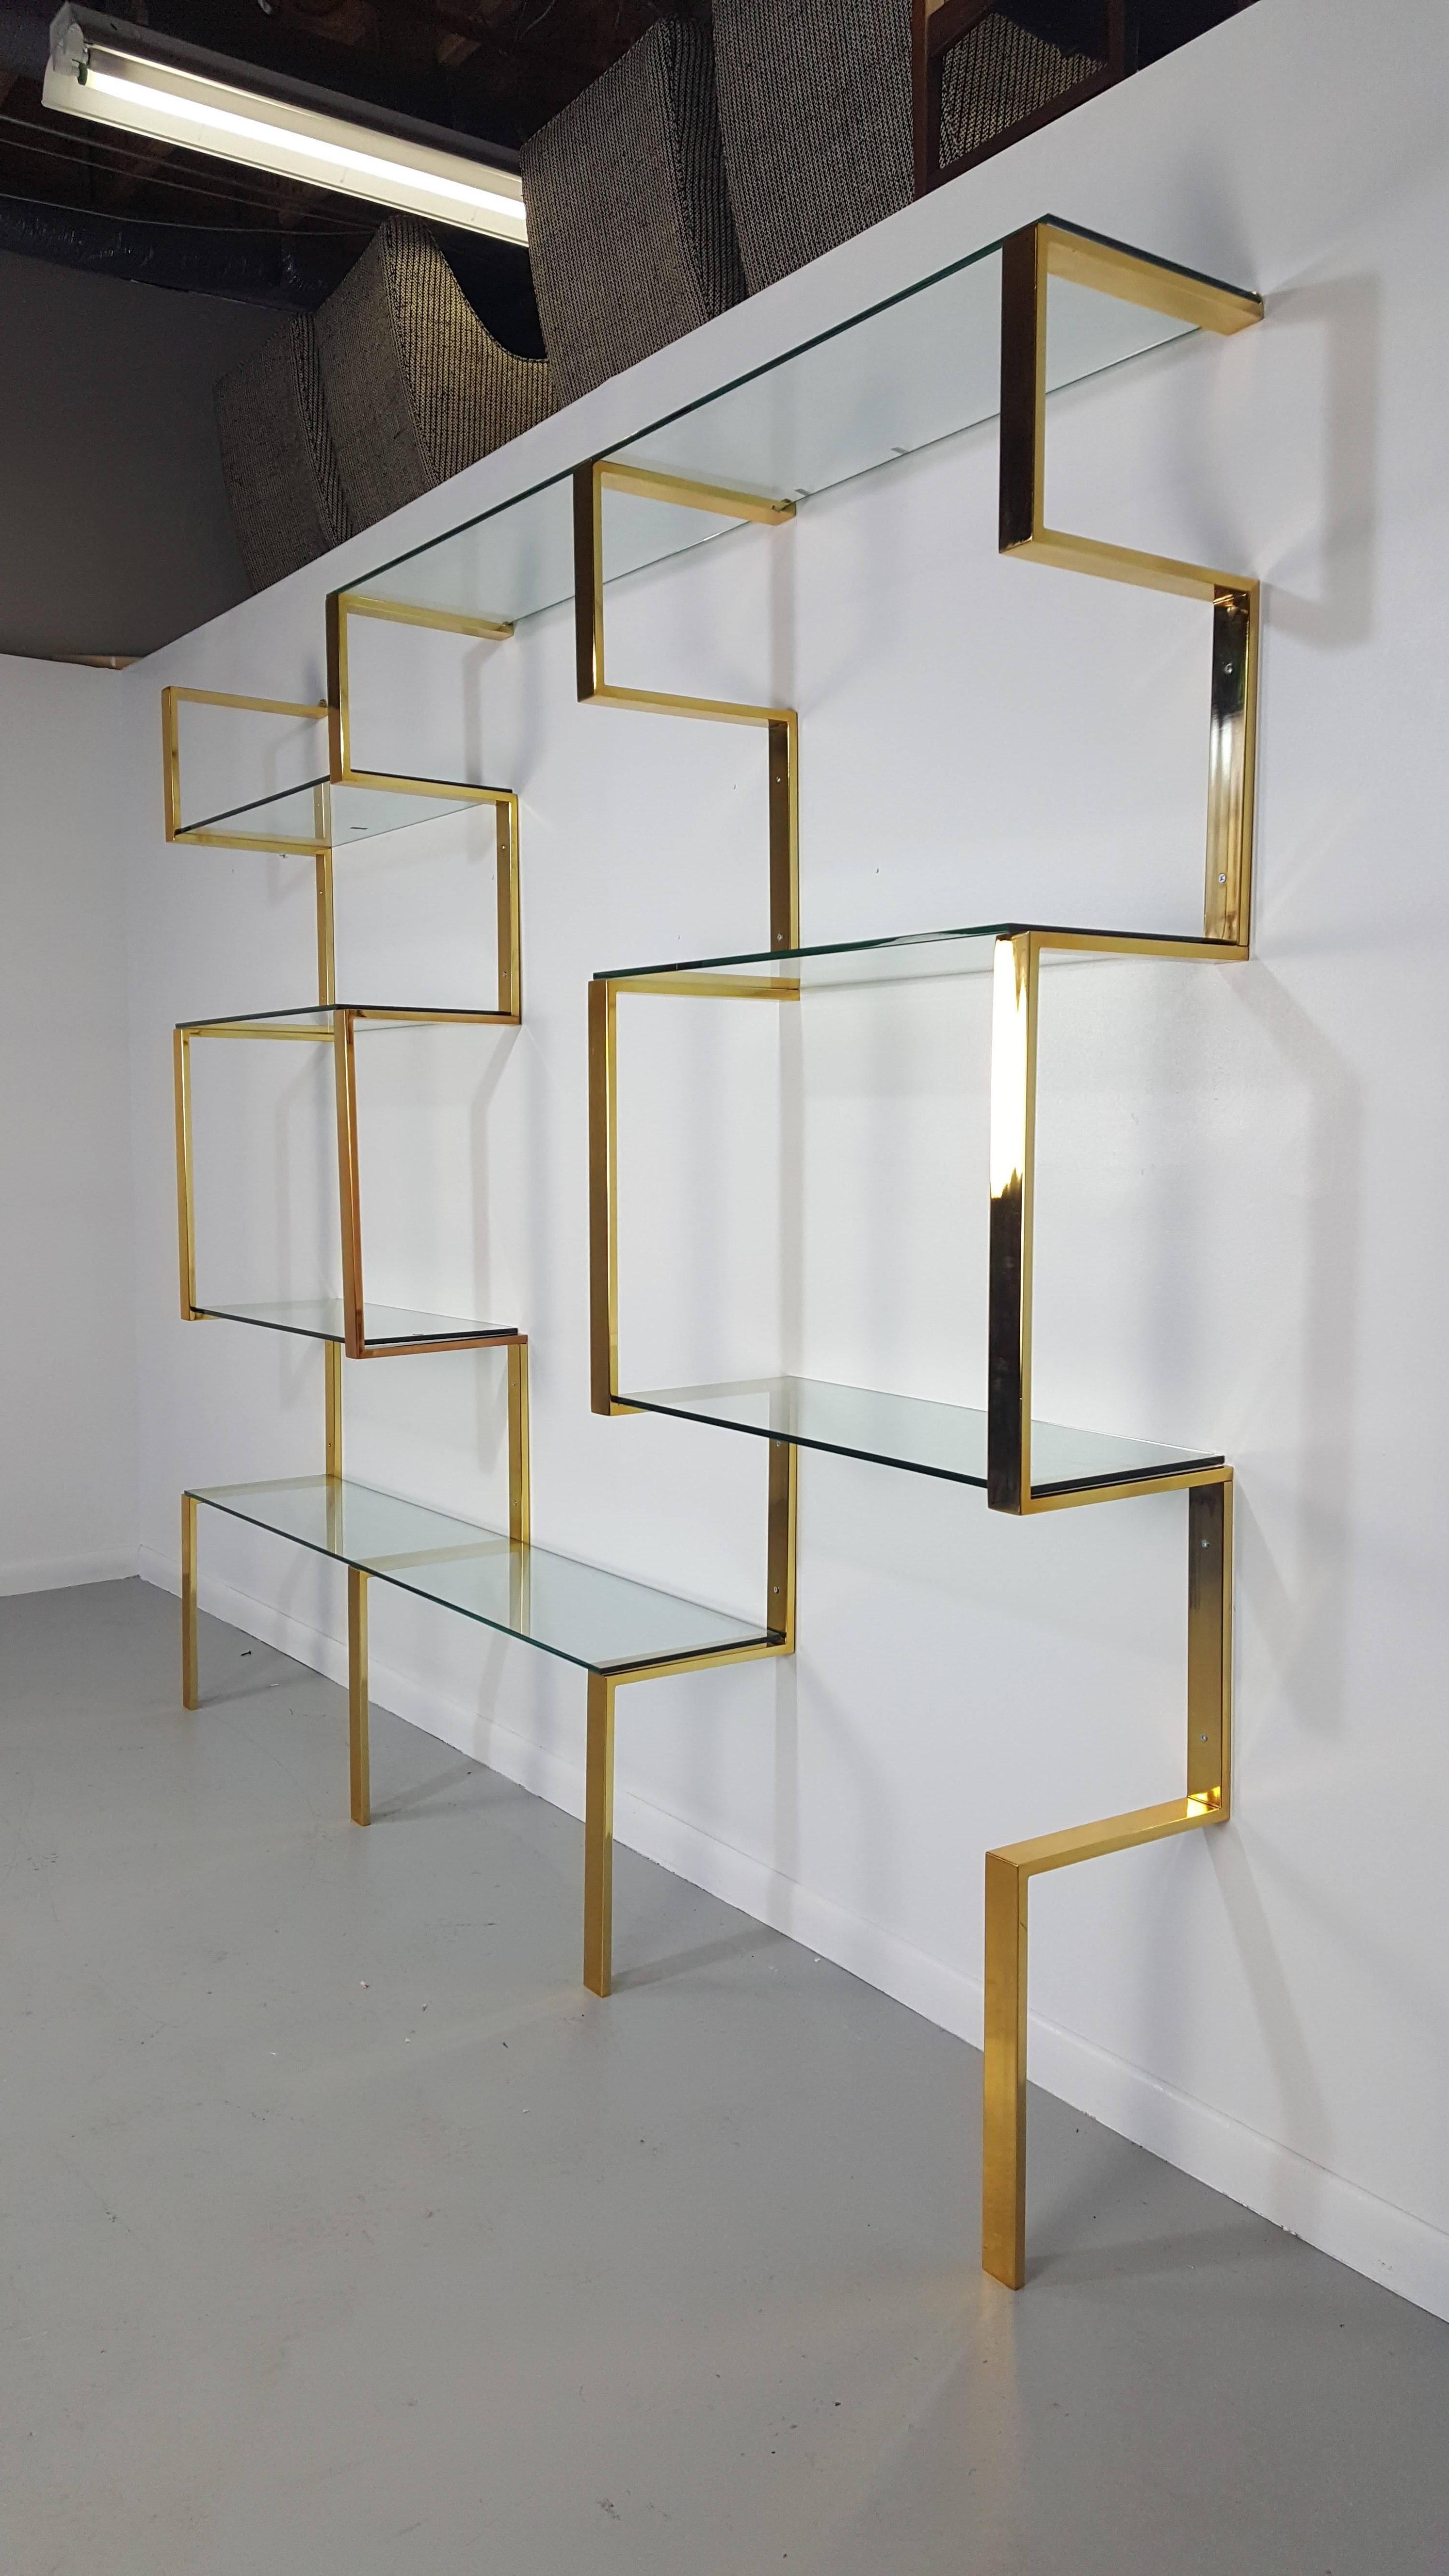 Architectural brass etagere shelving unit after Milo Baughman, 1970s. Wall mount system that can be adjusted to various widths to suite your space. Newly refinished in gold-toned brass.

We offer free regular deliveries to NYC and Philadelphia